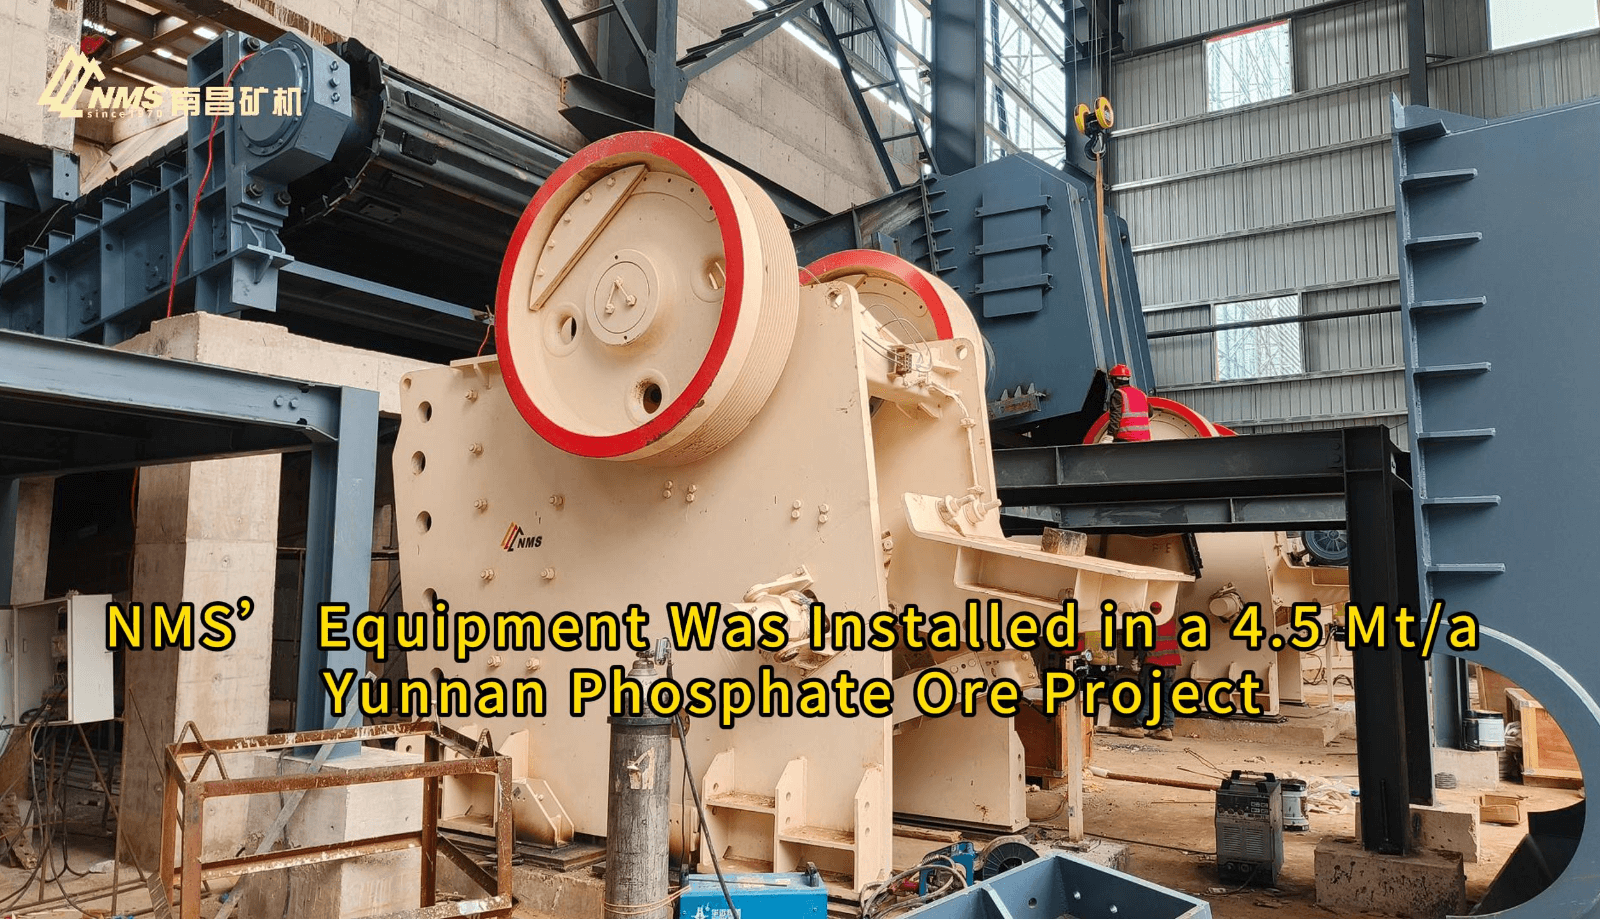 NMS’ Equipment Was Installed in a 4.5 Mt/a Yunnan Phosphate Ore Project